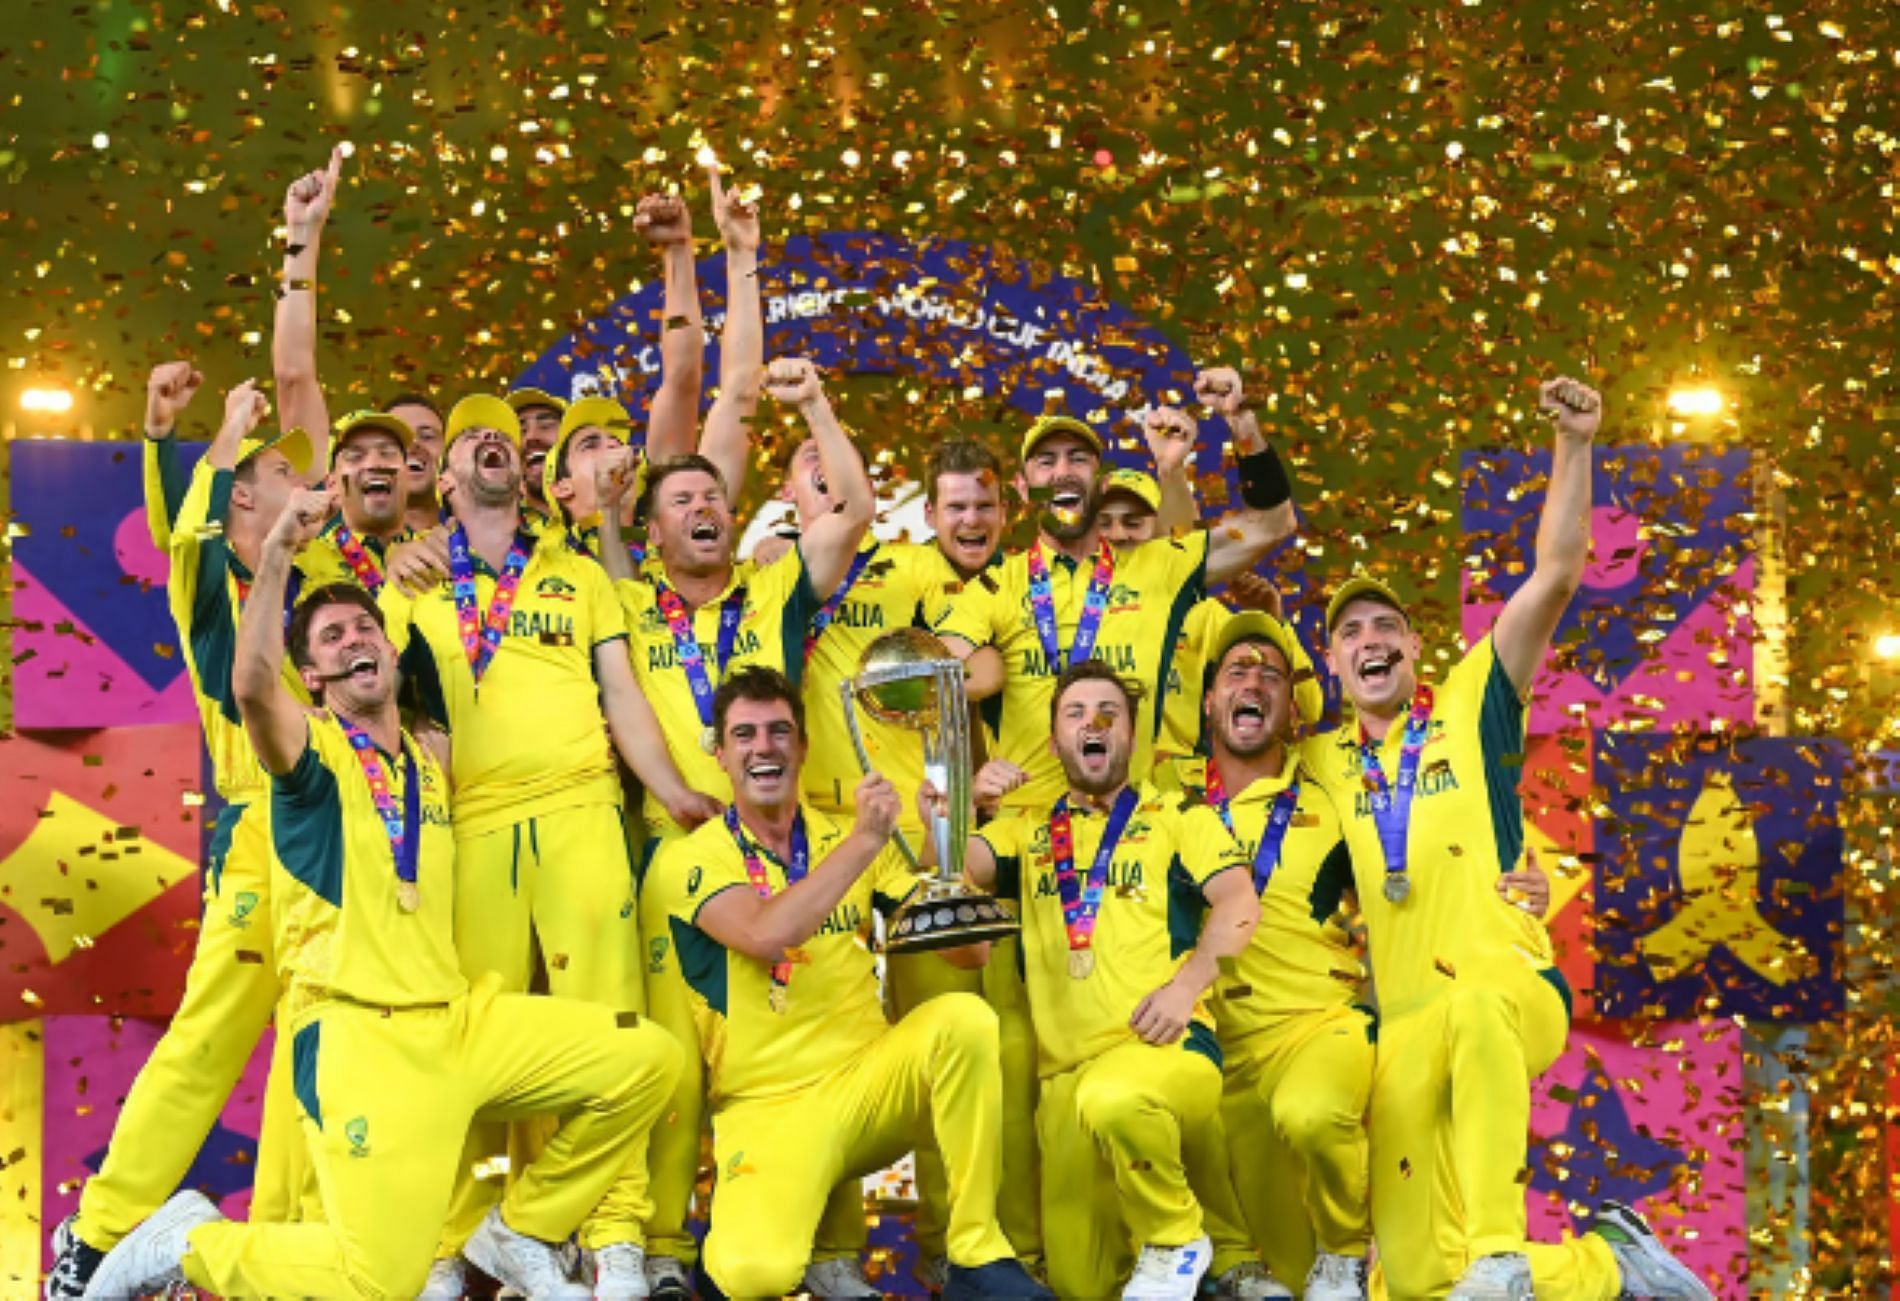 Australia clinched their sixth ODI World Cup title.